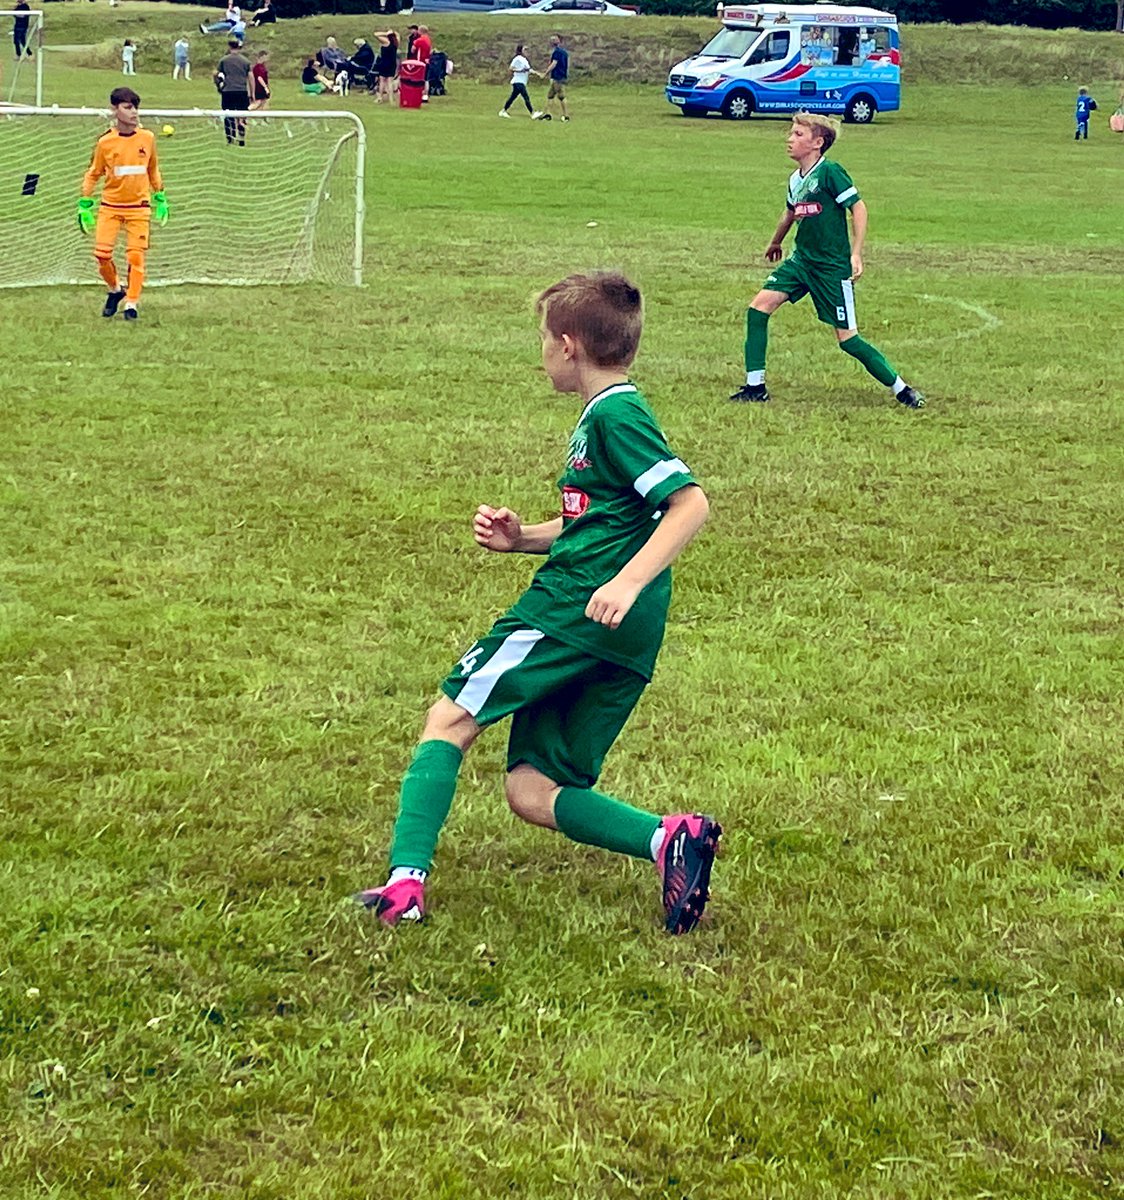 Couldn’t be prouder of these boys this weekend at the Gorleston Rangers tournament #norefnogame #grassrootsfootball #greenarmy #prouddad